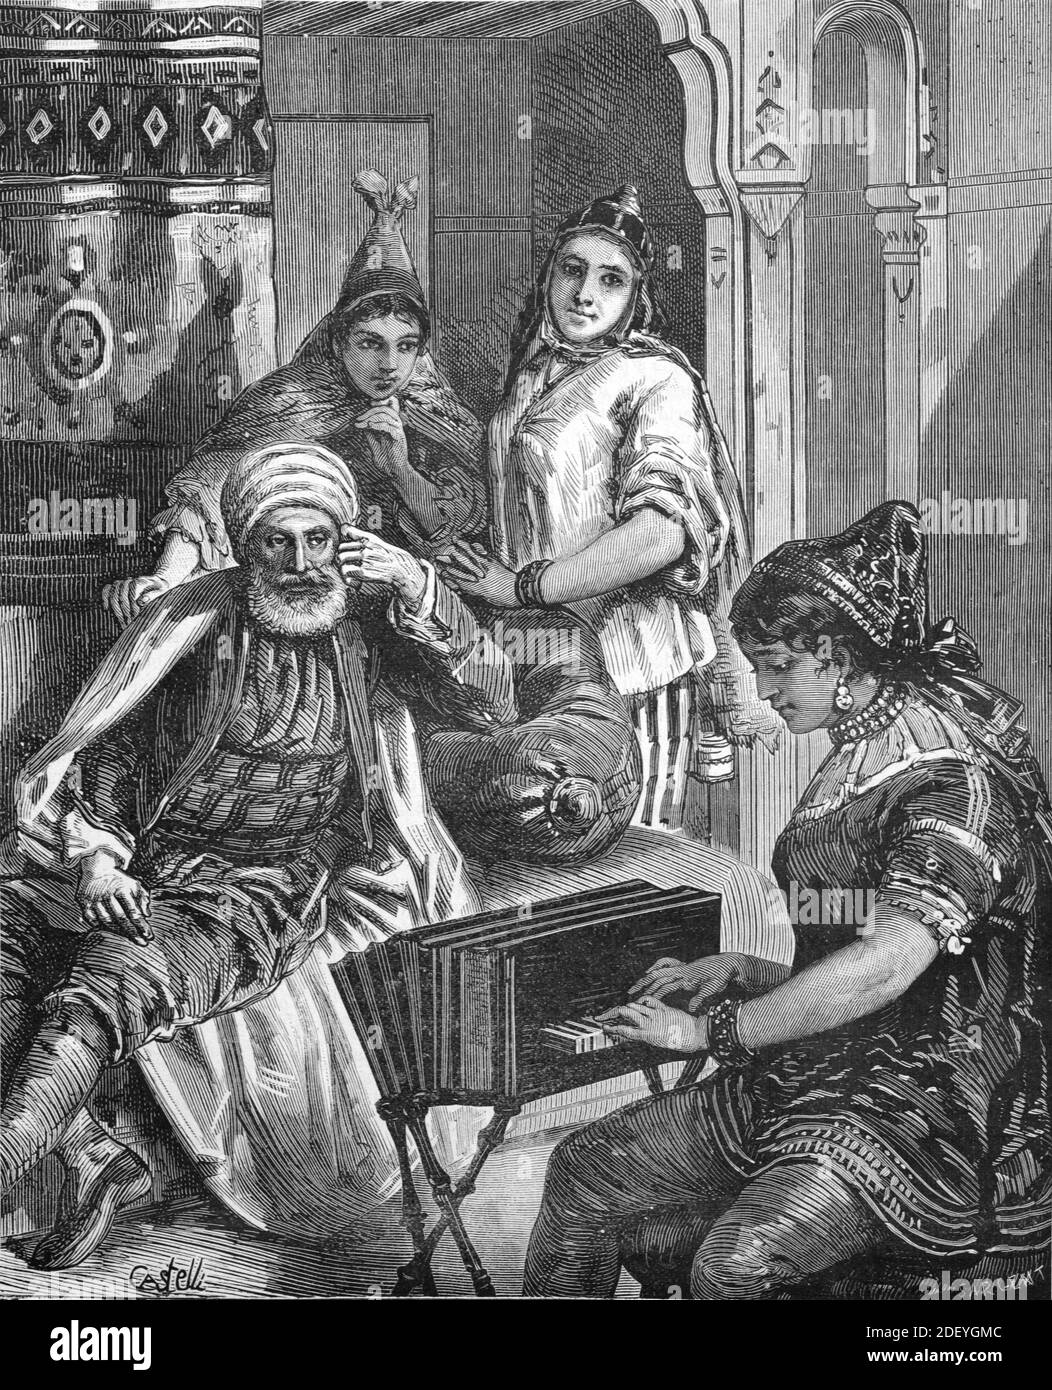 Saturday Evening Music Night in a Jewish Family House in Tunis Tunisia (Engr Castelli, 1884) Vintage Engraving or Illustration Stock Photo